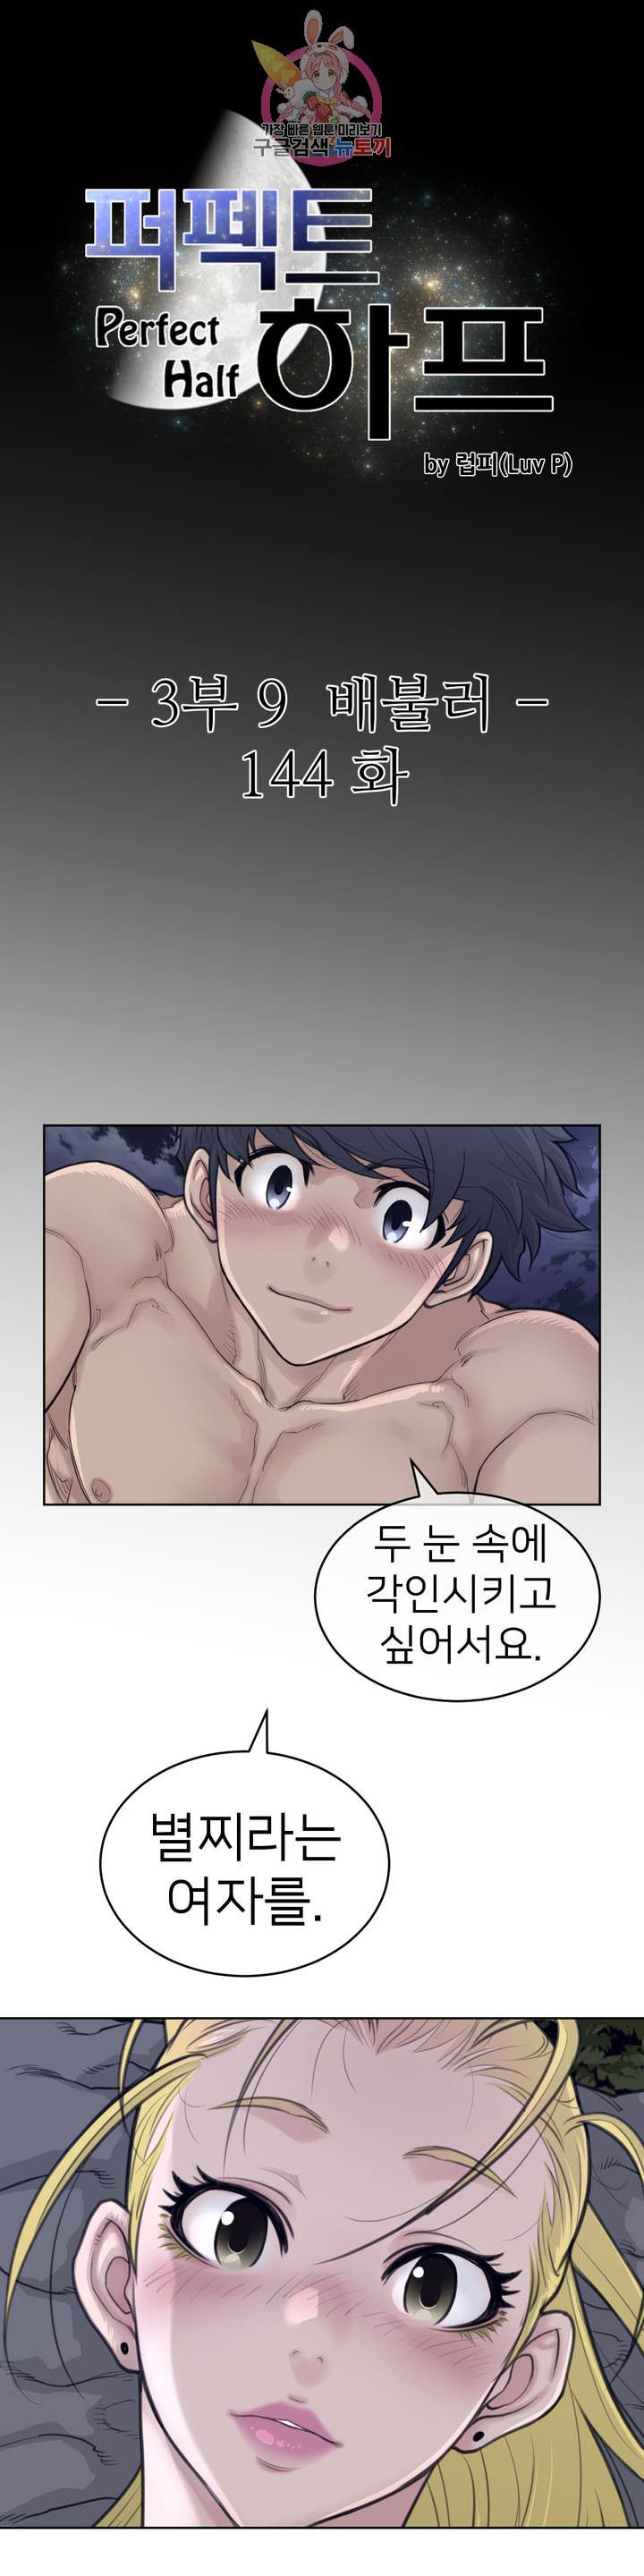 Perfect Half Raw - Chapter 144 Page 3